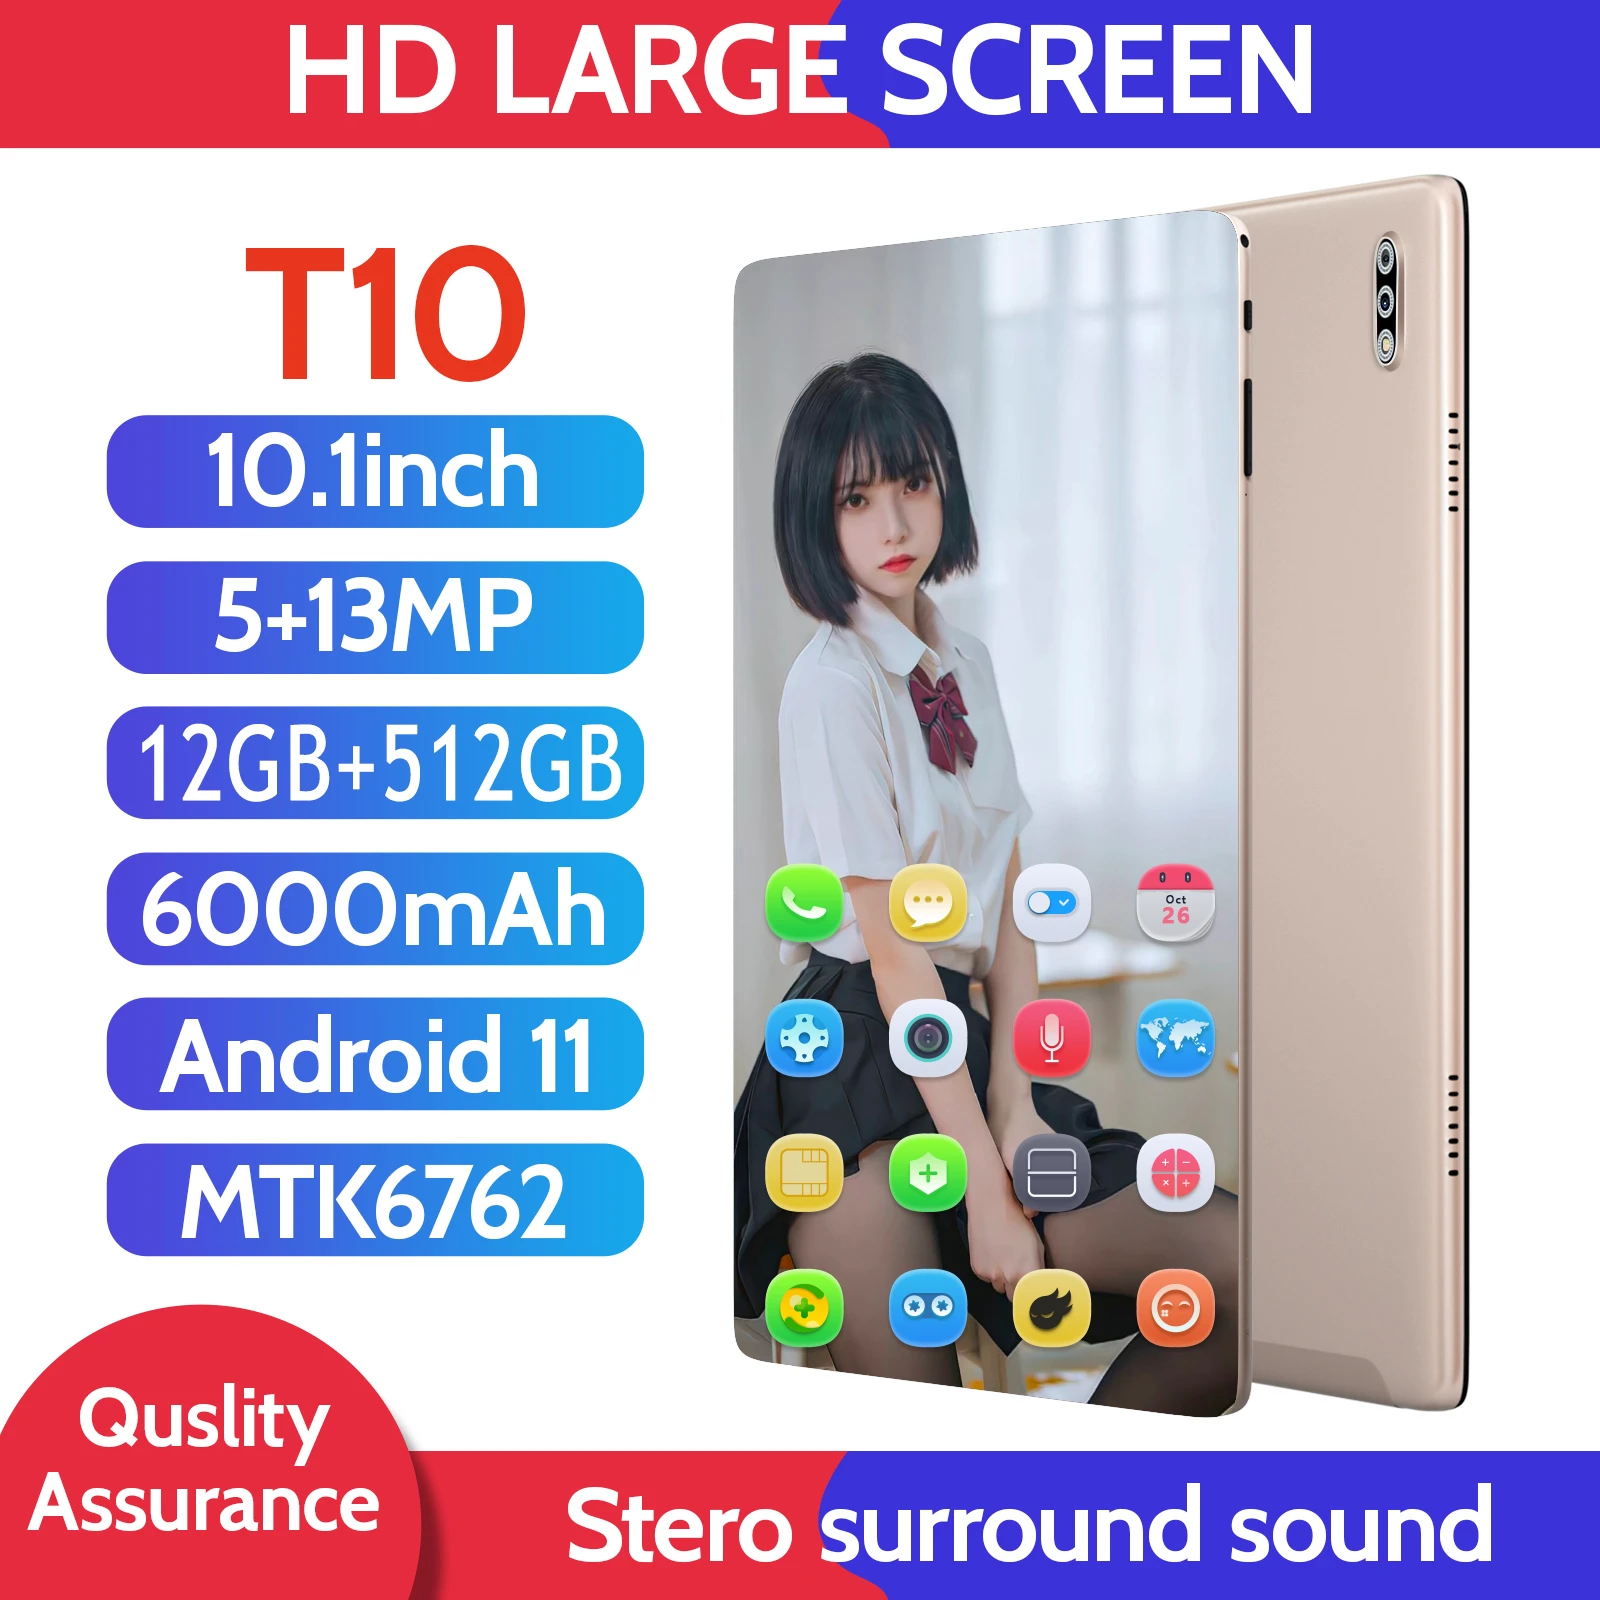 10.1Inch Large Screen T10 Pad 4G 5G Double SIM 6000mAh MTK6762 Wifi 512GB ROM Android 11 Google Play Race Hot Sales Tablet PC most popular tablet brands